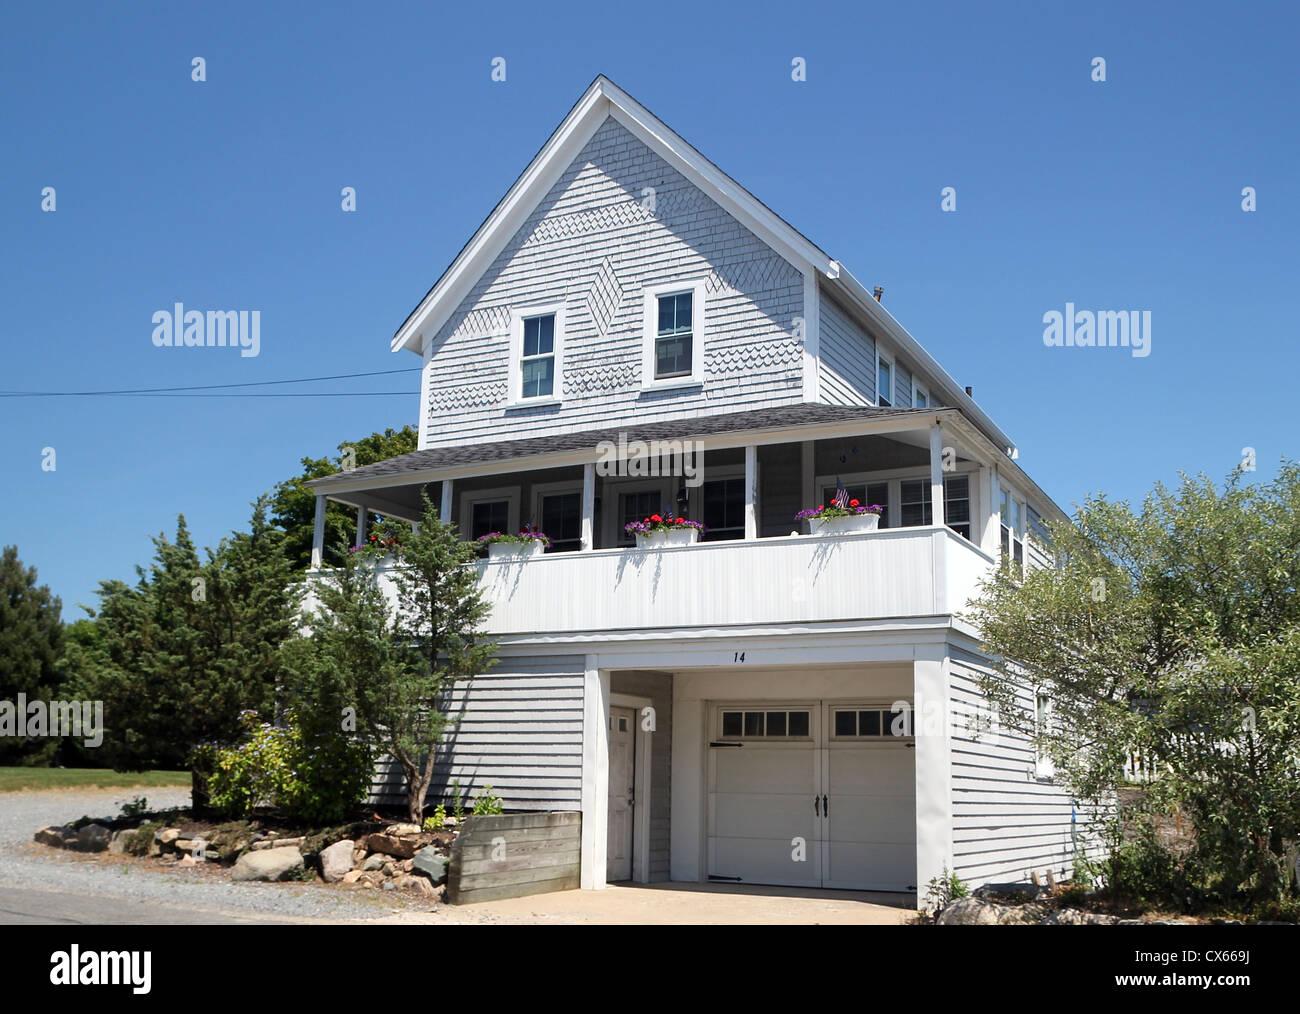 A home in Hyannis, Cape Cod, Massachusetts Stock Photo